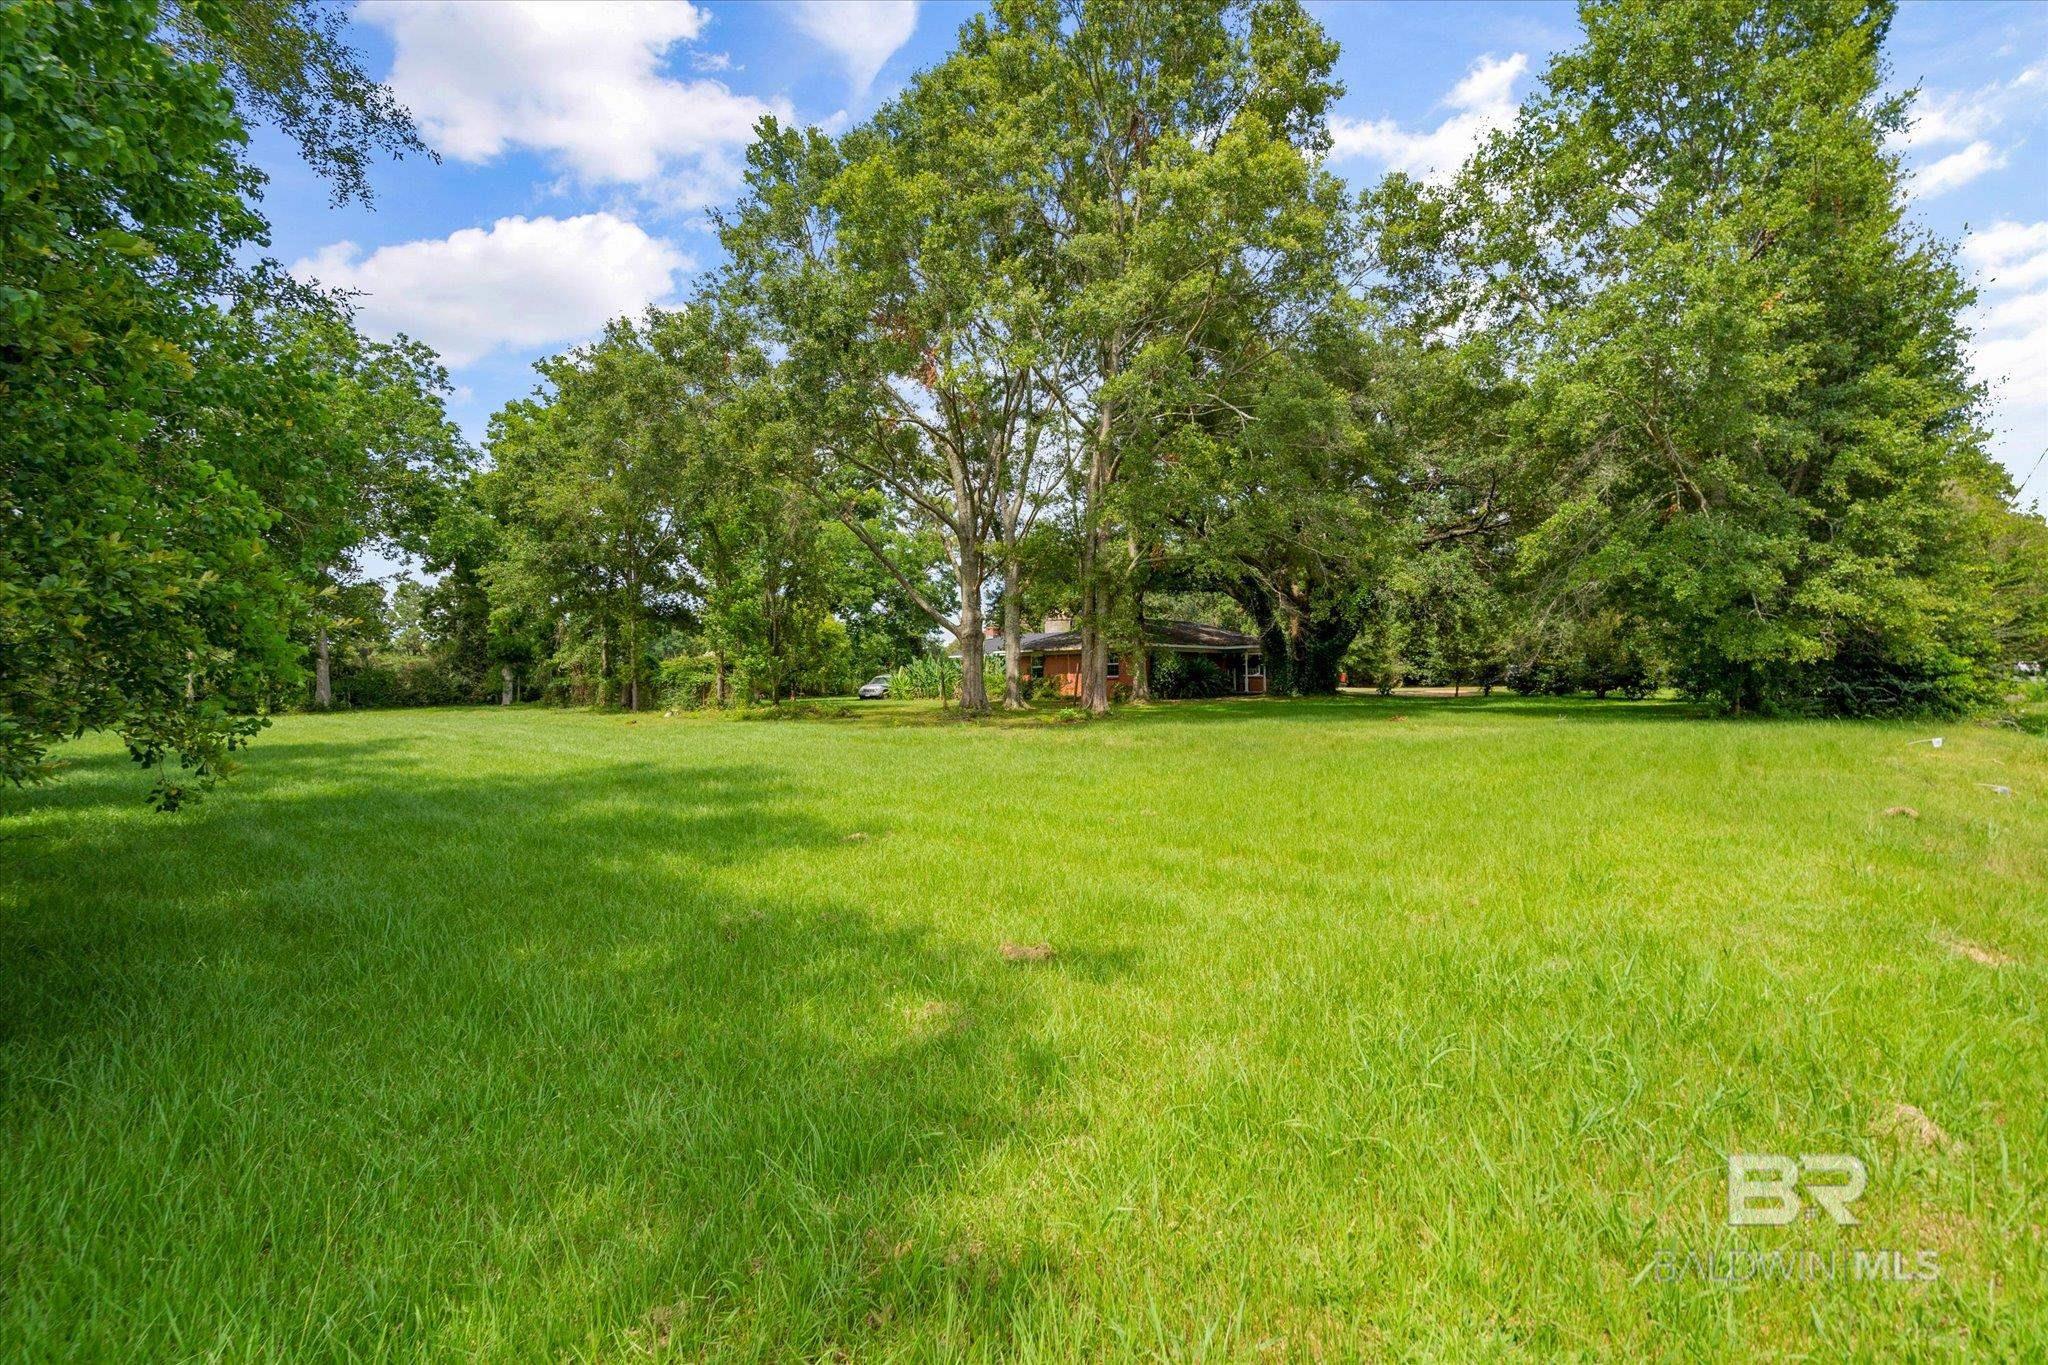 Cleared lot with some mature trees, centrally located in Fairhope! The lot, which was recently subdivided from the house to the east (8631 Morphy Ave, Lot 1), is 100 ft x 236 ft, or approx. 0.54 acres.